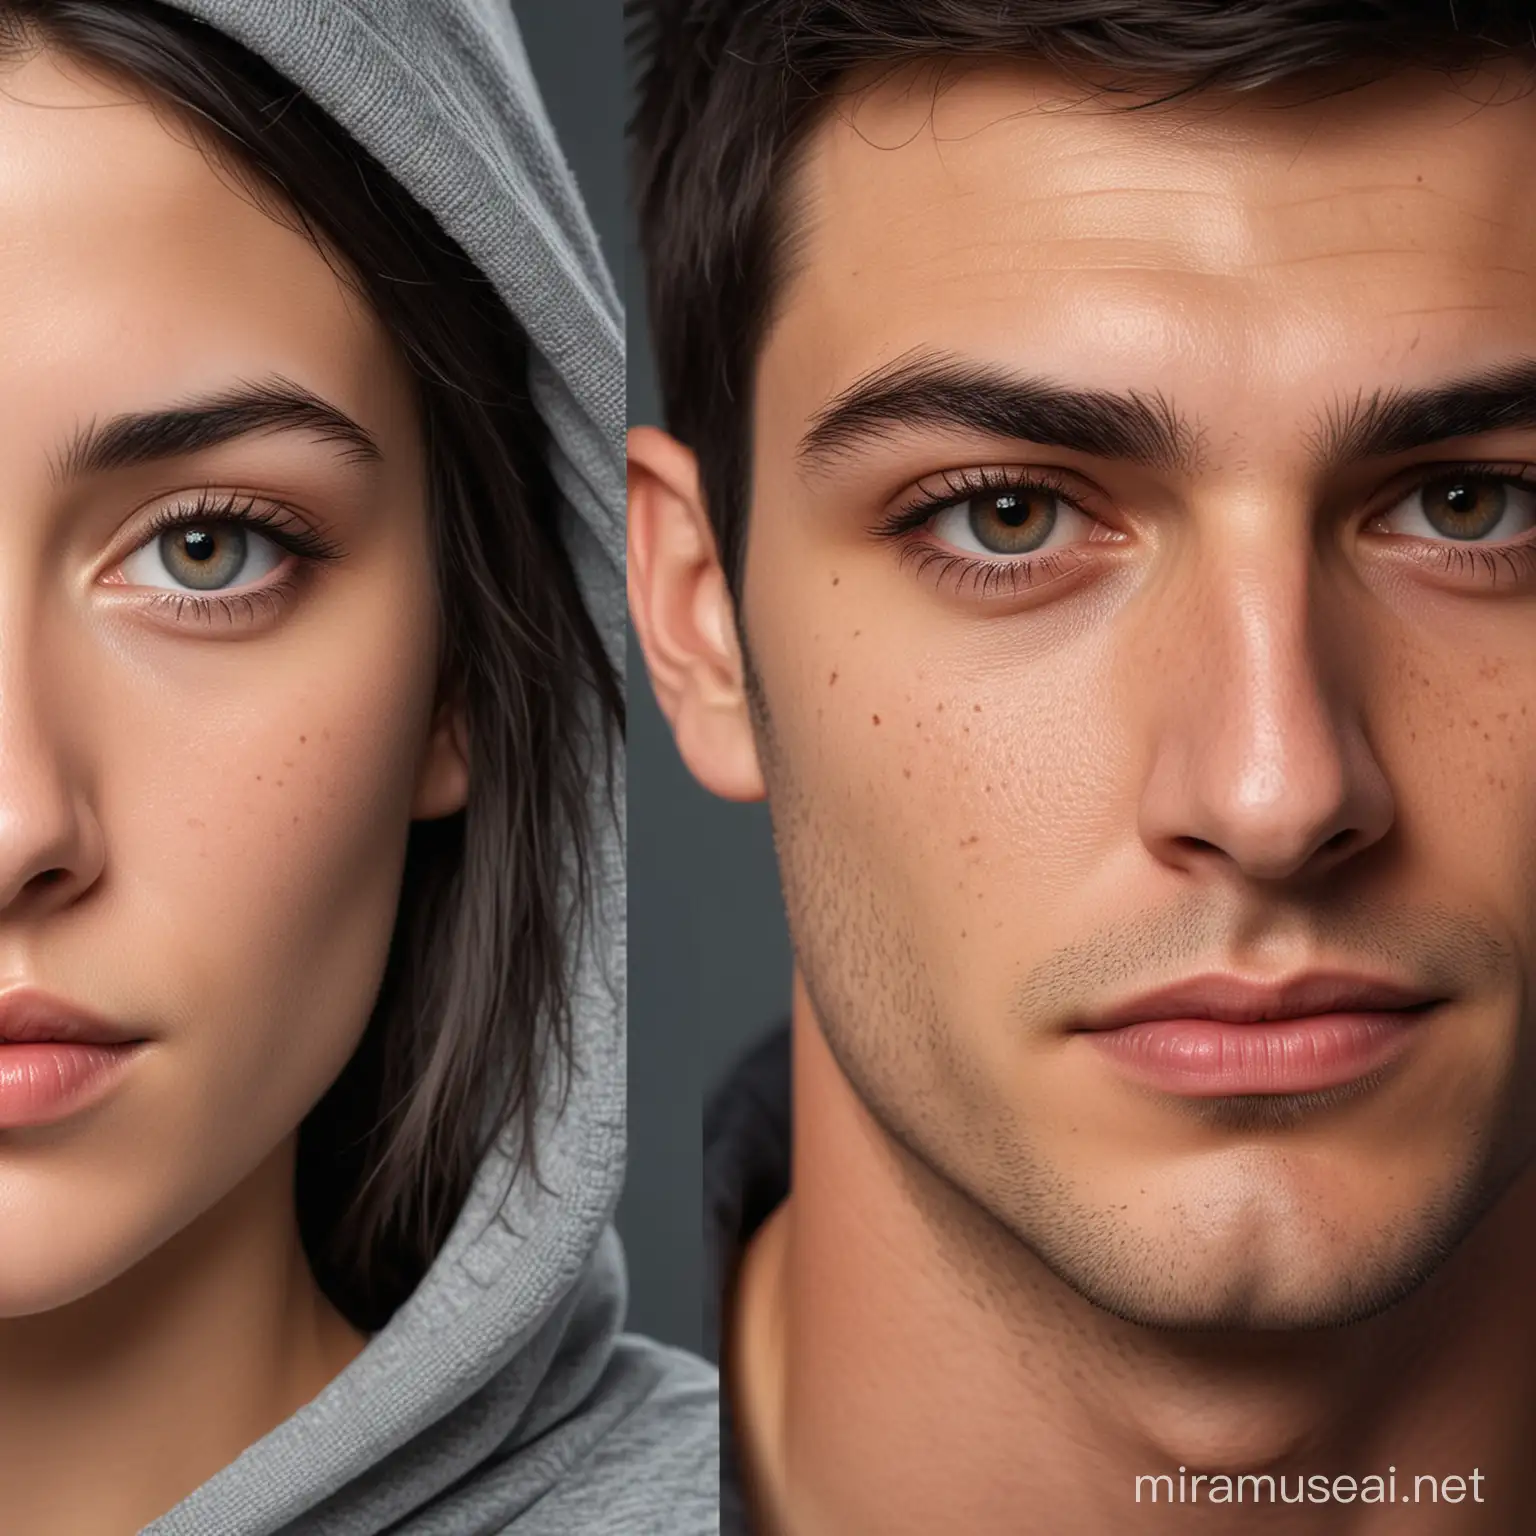 Split-screen photo. On the left side, the young woman face with dark hair and a clean shave. On the right side, the man with hoodie and grim look. Both sides are in full color, showing detailed skin texture and realistic features, with the division line running down the center of the image.